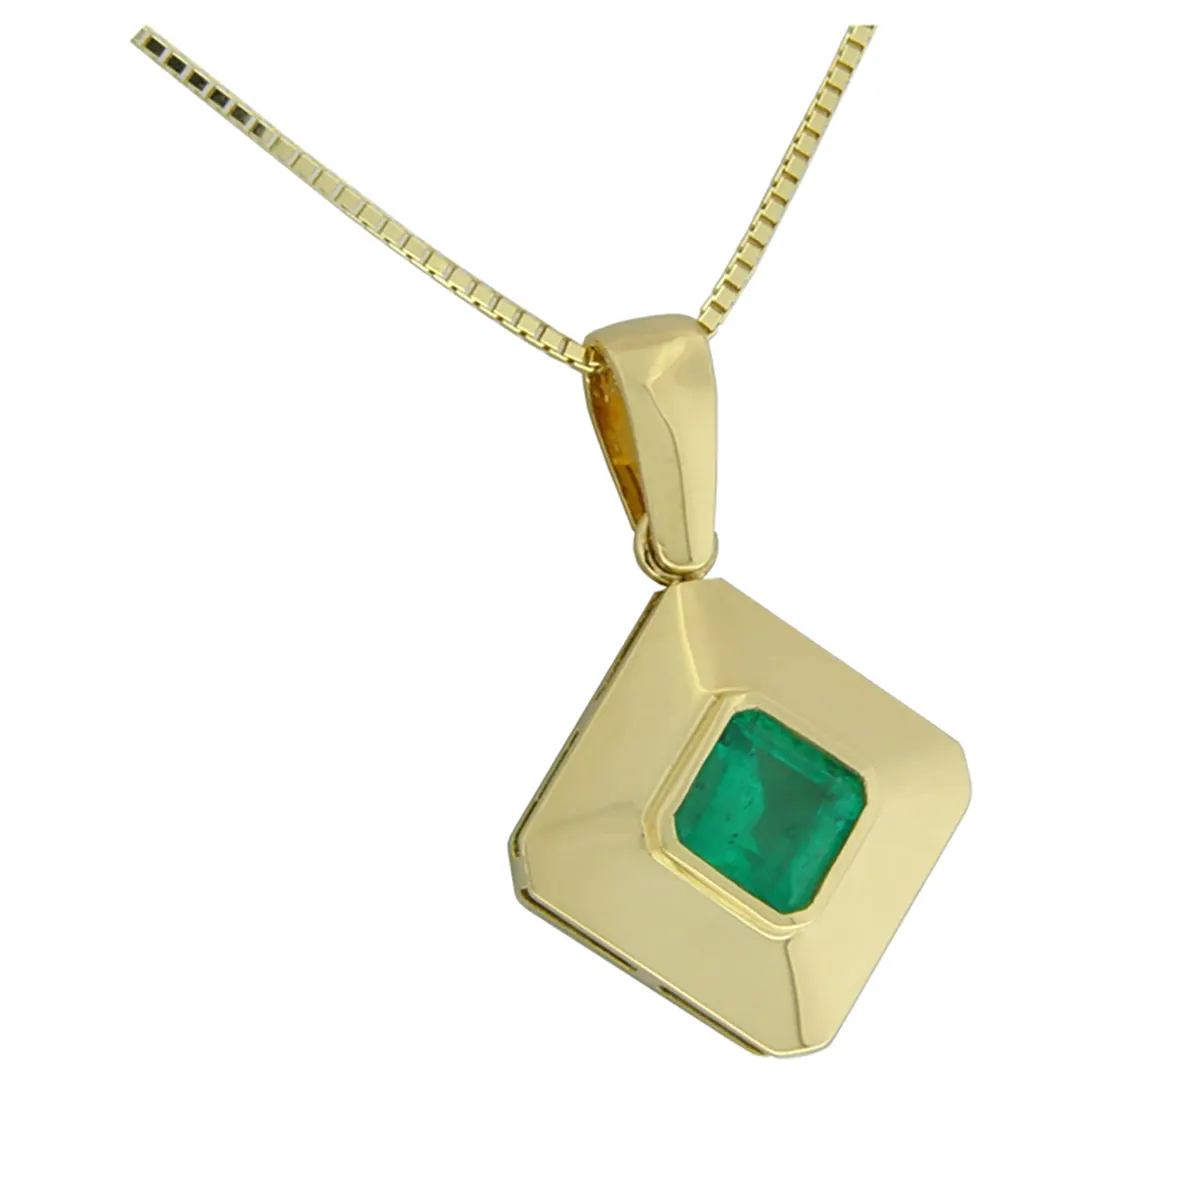 Unisex emerald pendant necklace with a square-shaped emerald cut emerald set in a high polish bezel setting solid gold rhombus form